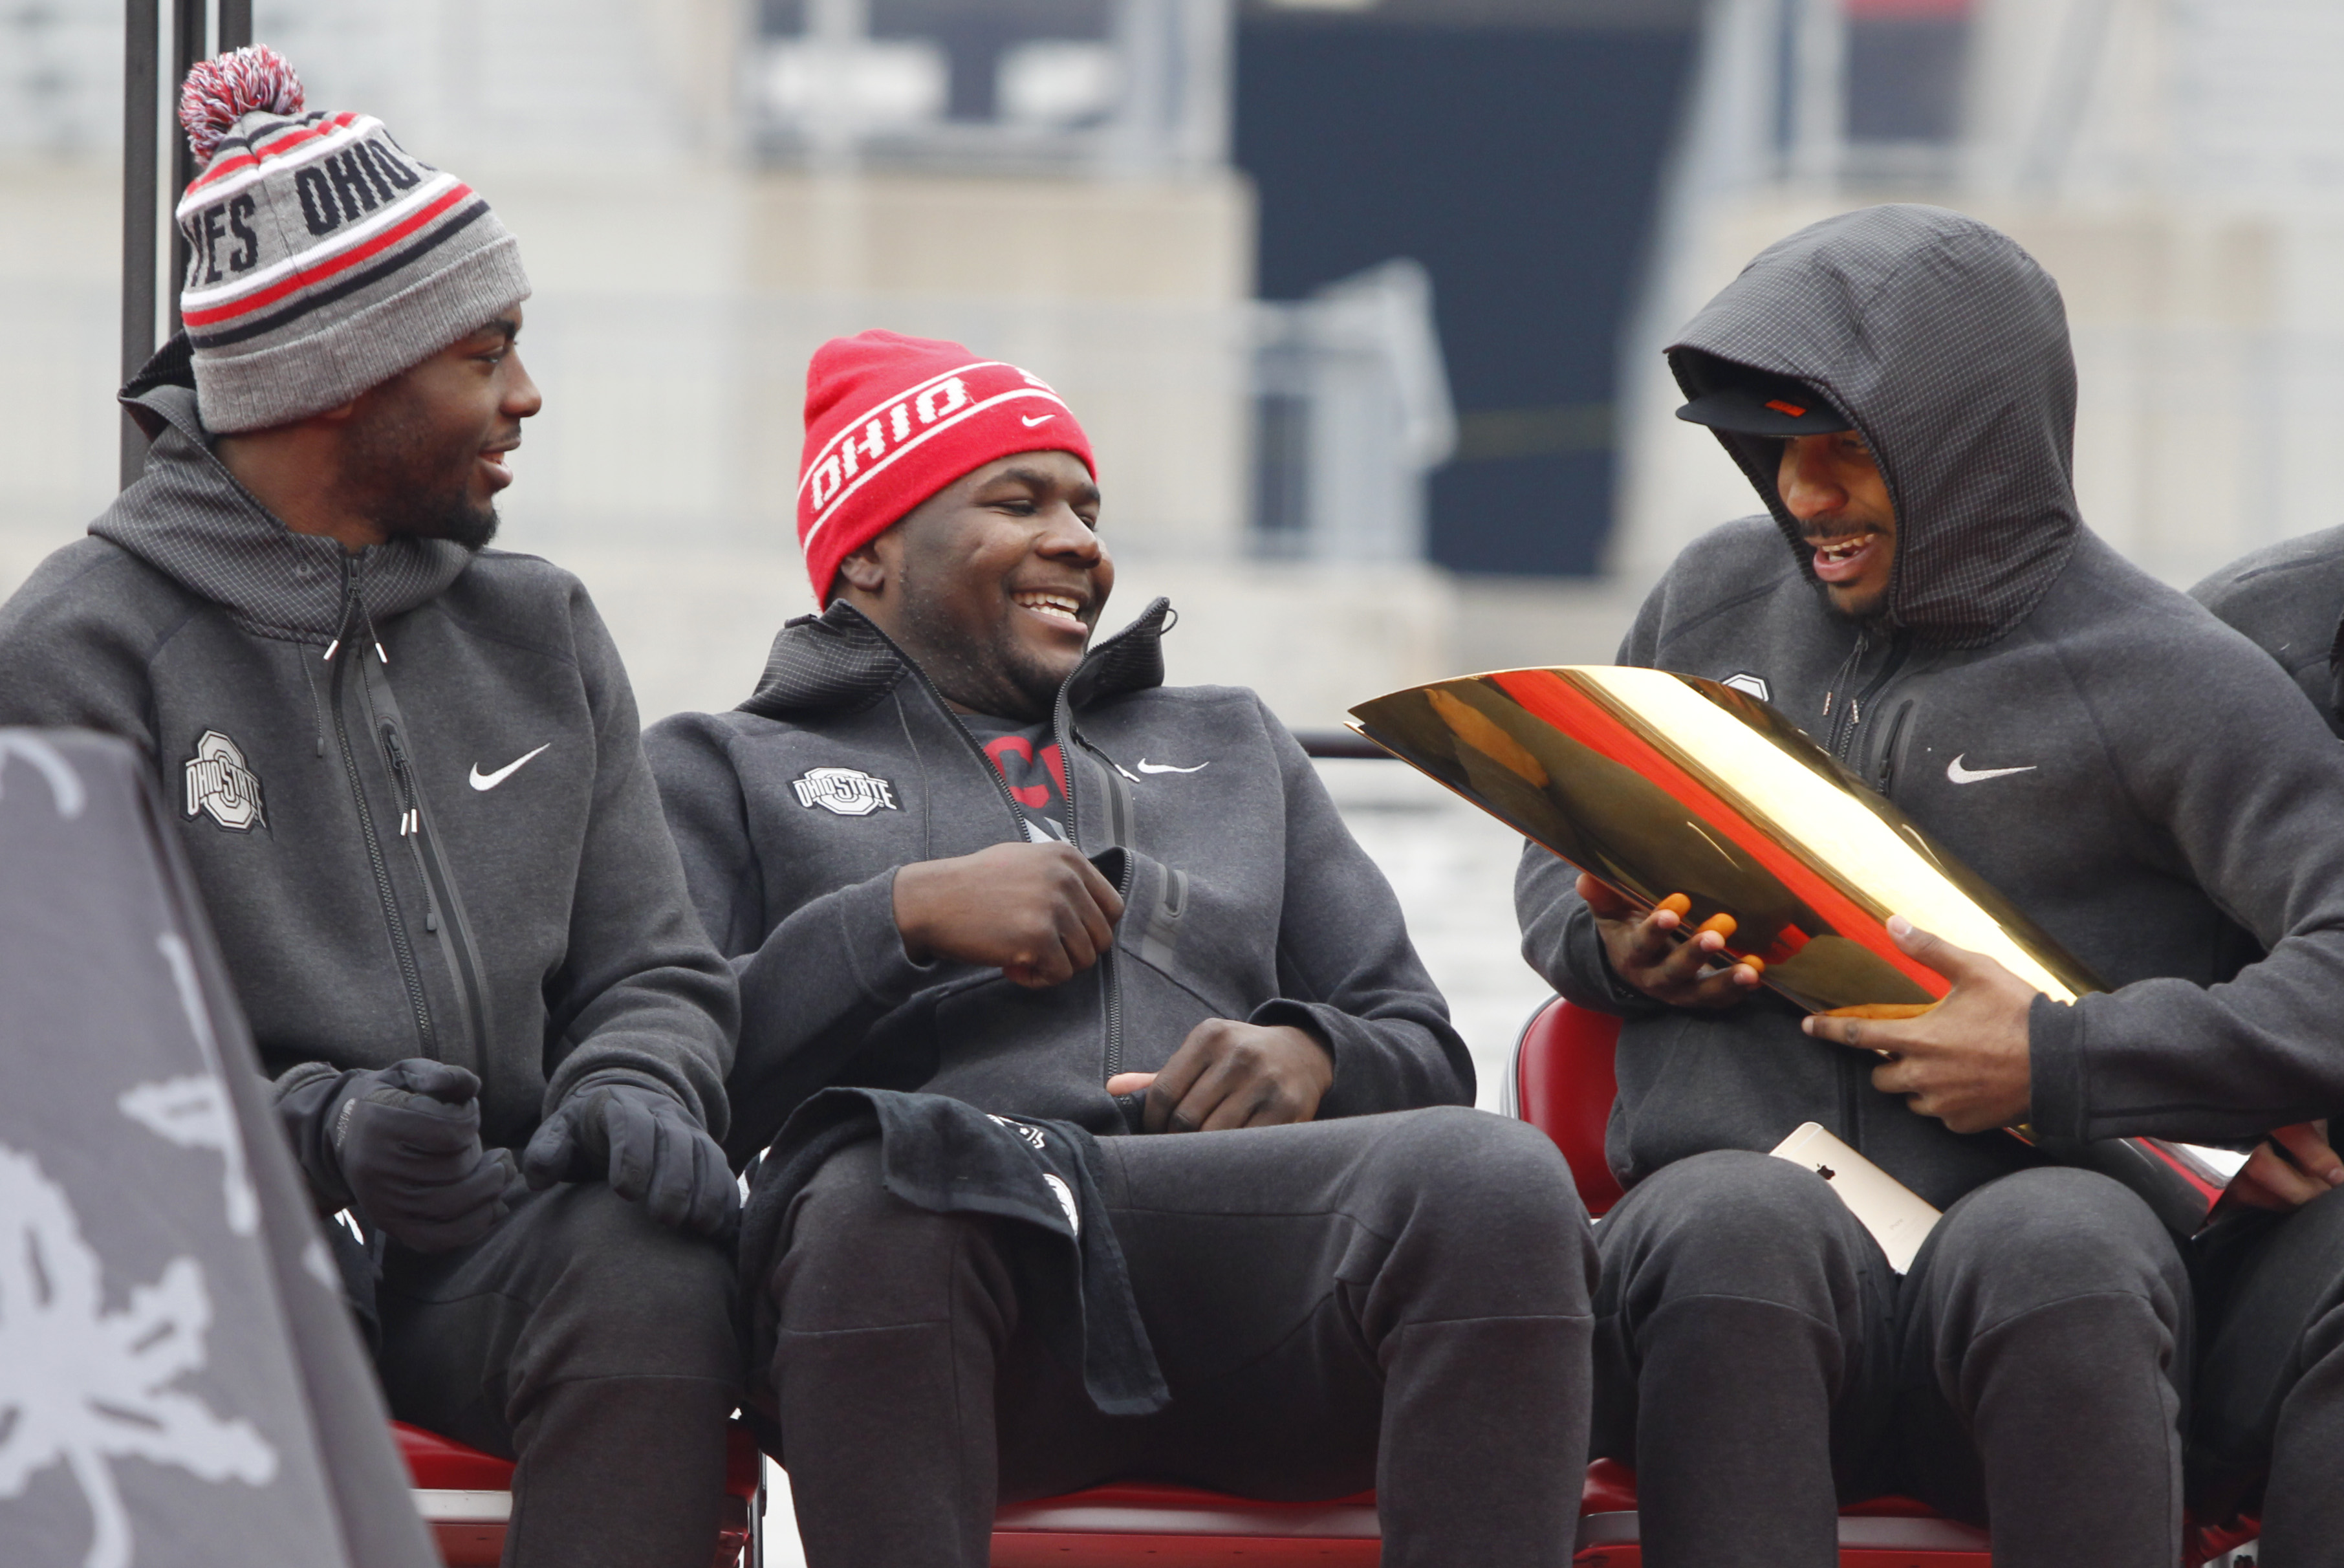 Ohio State football quarterbacks J.T. Barrett, left, Cardale Jones and Braxton Miller look at the College Football Playoff national championship trophy during a celebration of the Buckeyes national championship at Ohio Stadium in Columbus, Ohio, Saturday, Jan. 24, 2015. (AP Photo/Paul Vernon)